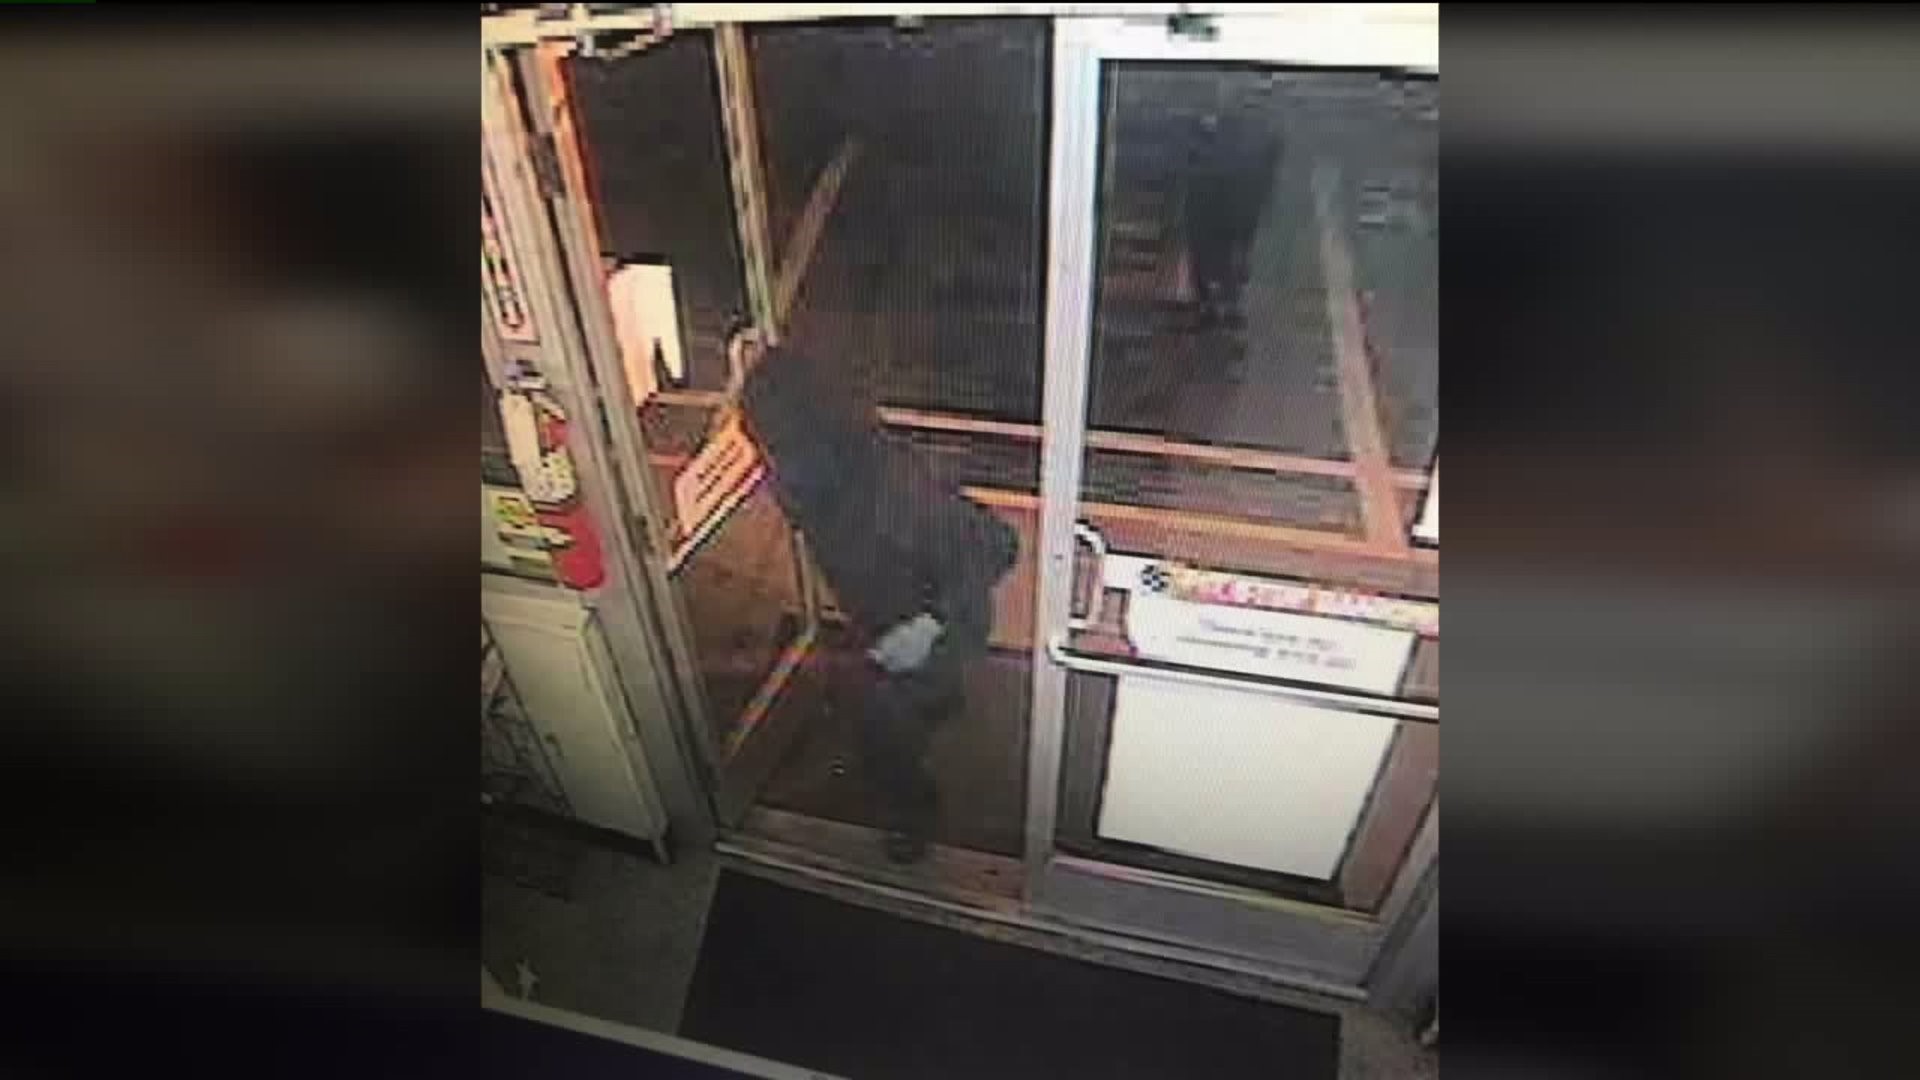 Clerk Robbed at Knifepoint; Police Looking for Witness